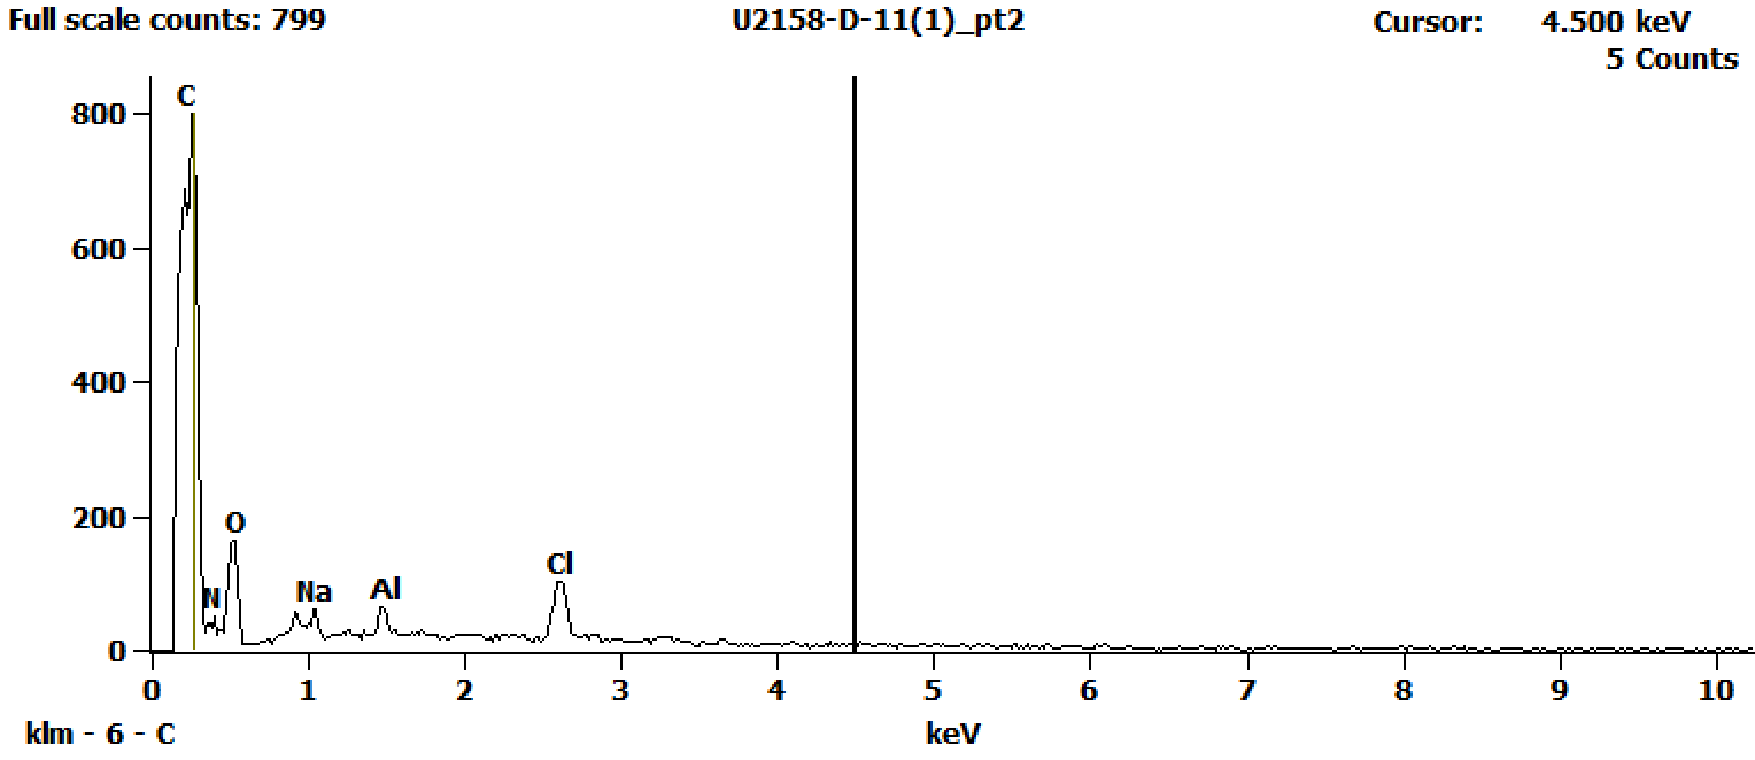 EDS Spectra for sample U2158-D-11 taken at test area 2. The test area is labeled in the particle SEM photo.